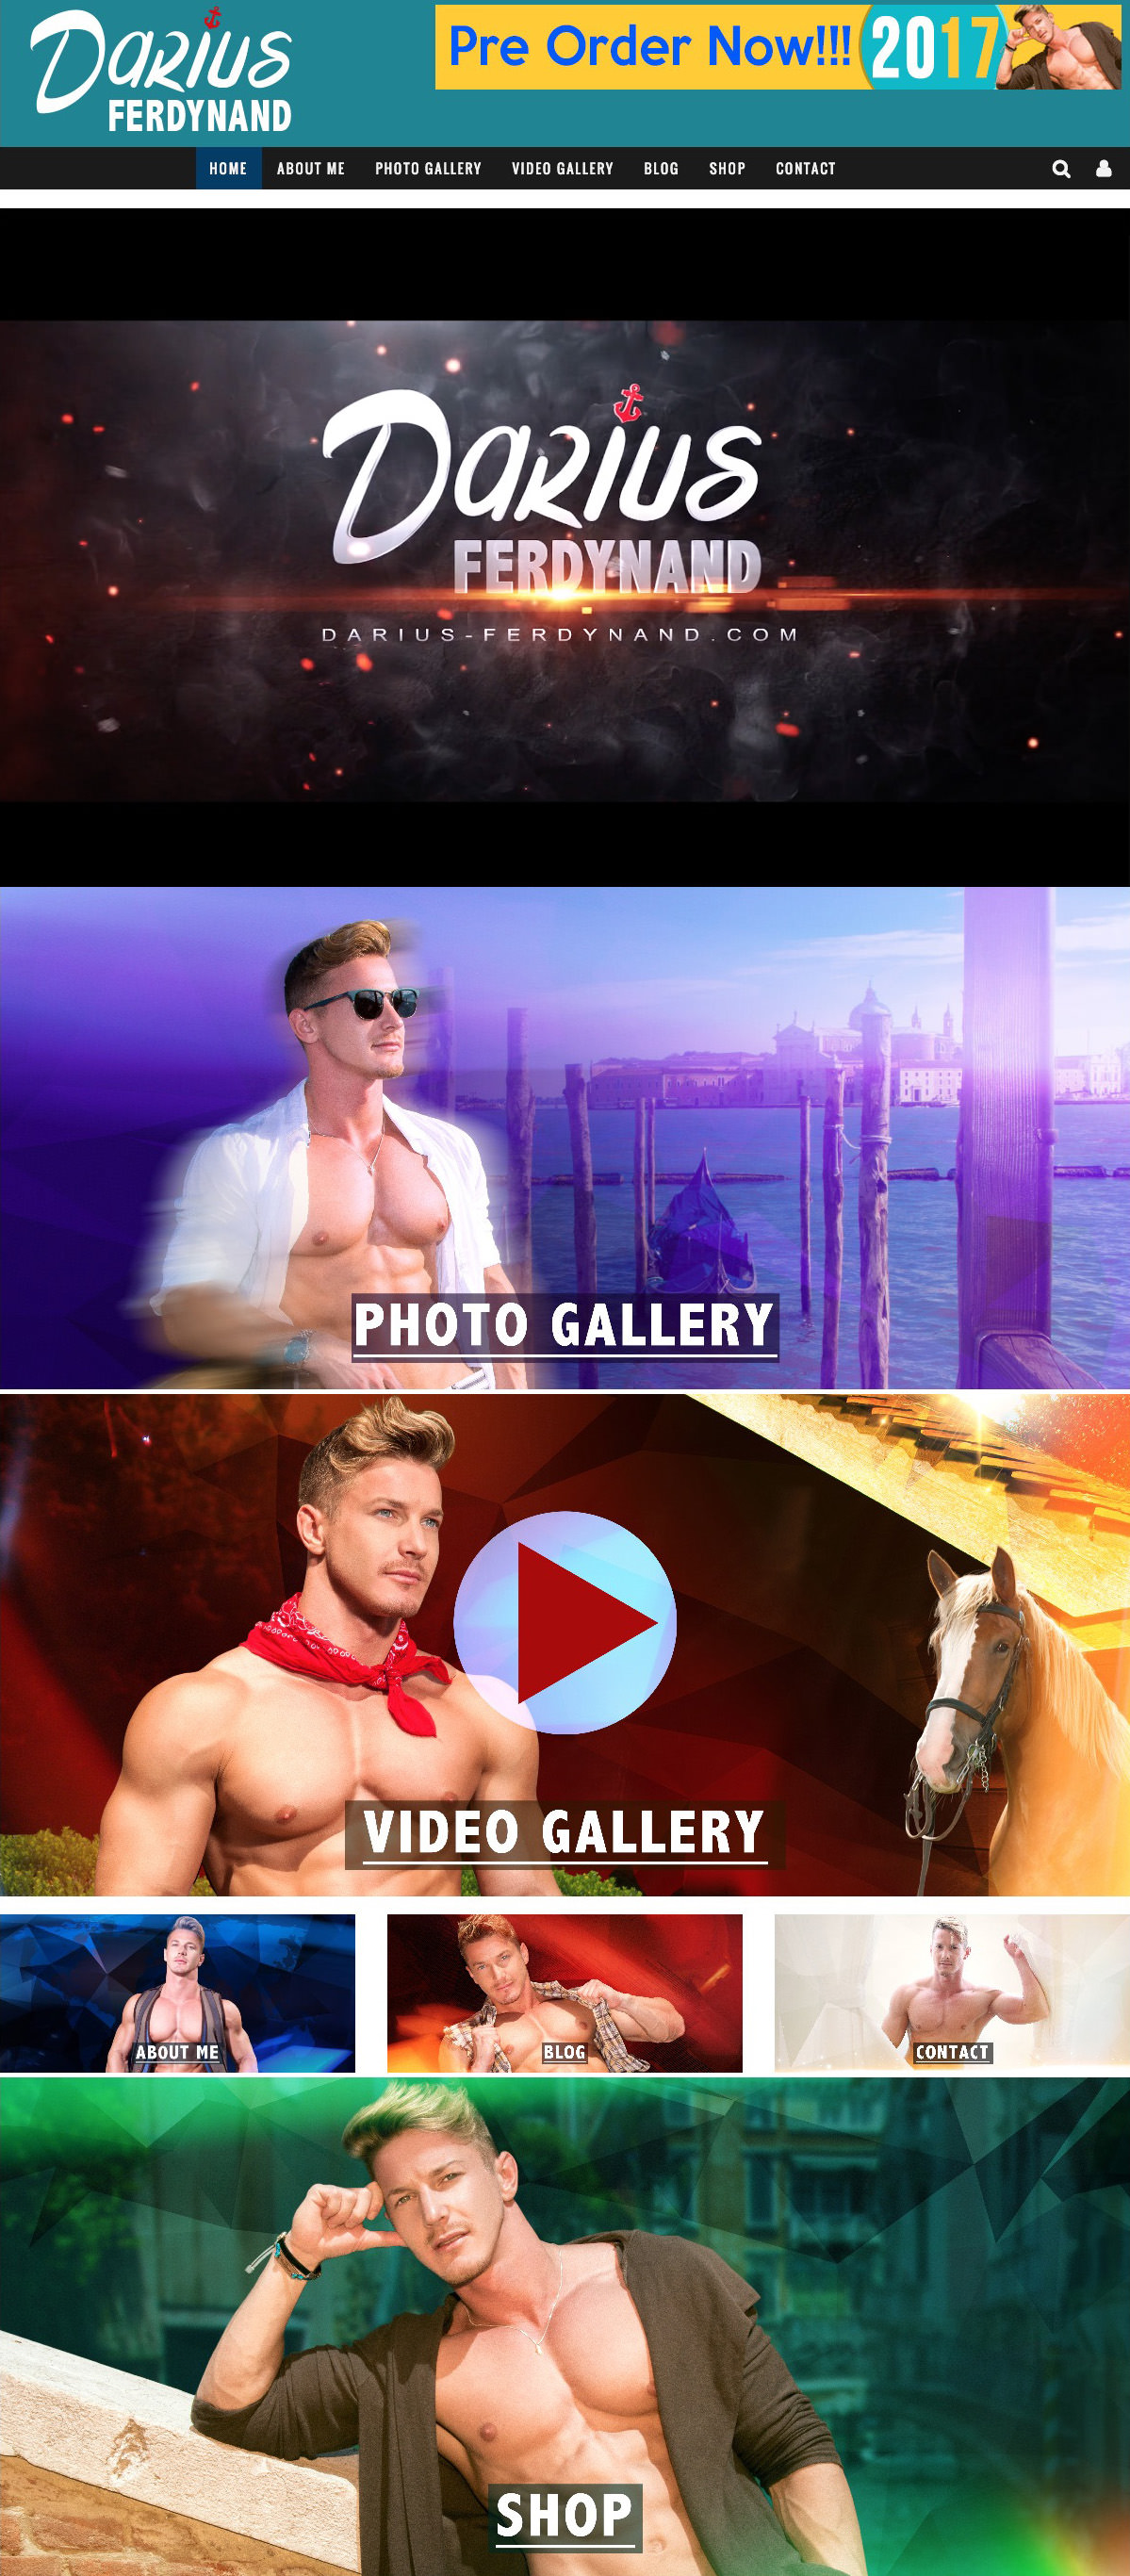 International gay pornstar official website with exclusive online content for adult entertainment.